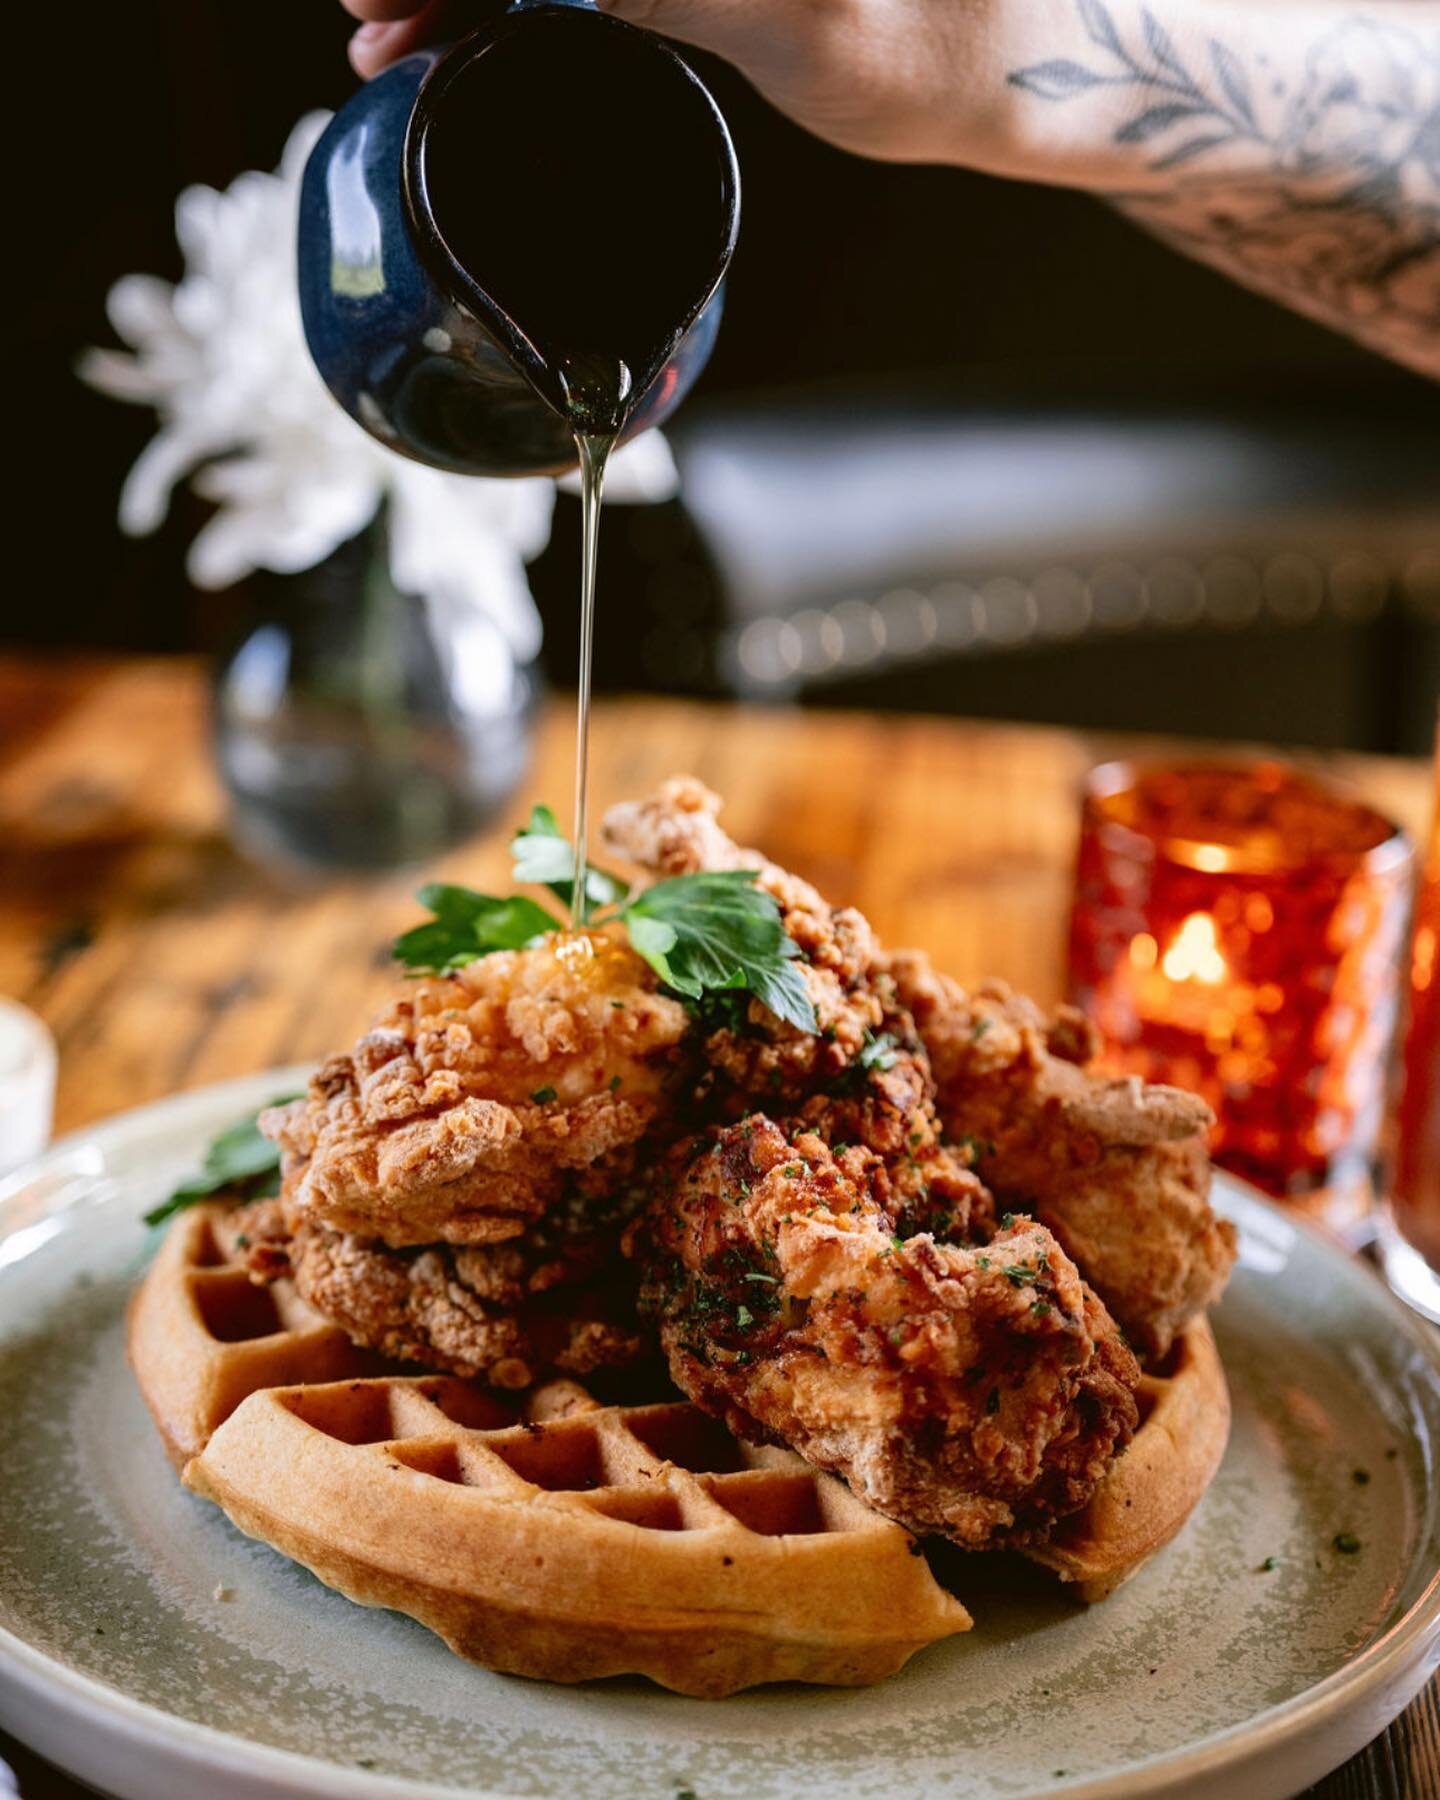 The only thing better than brunch is brunch at #TheLincolnNapa.

✨ This ✨ is happening for another 2 1/2 hours and again tomorrow at 10a!

🐓 Chicken and Waffles
🦞 Lobster and Chips 
🍳 Egg Sandwich
🍔 Smash Burger 
🌯 Breakfast Burrito